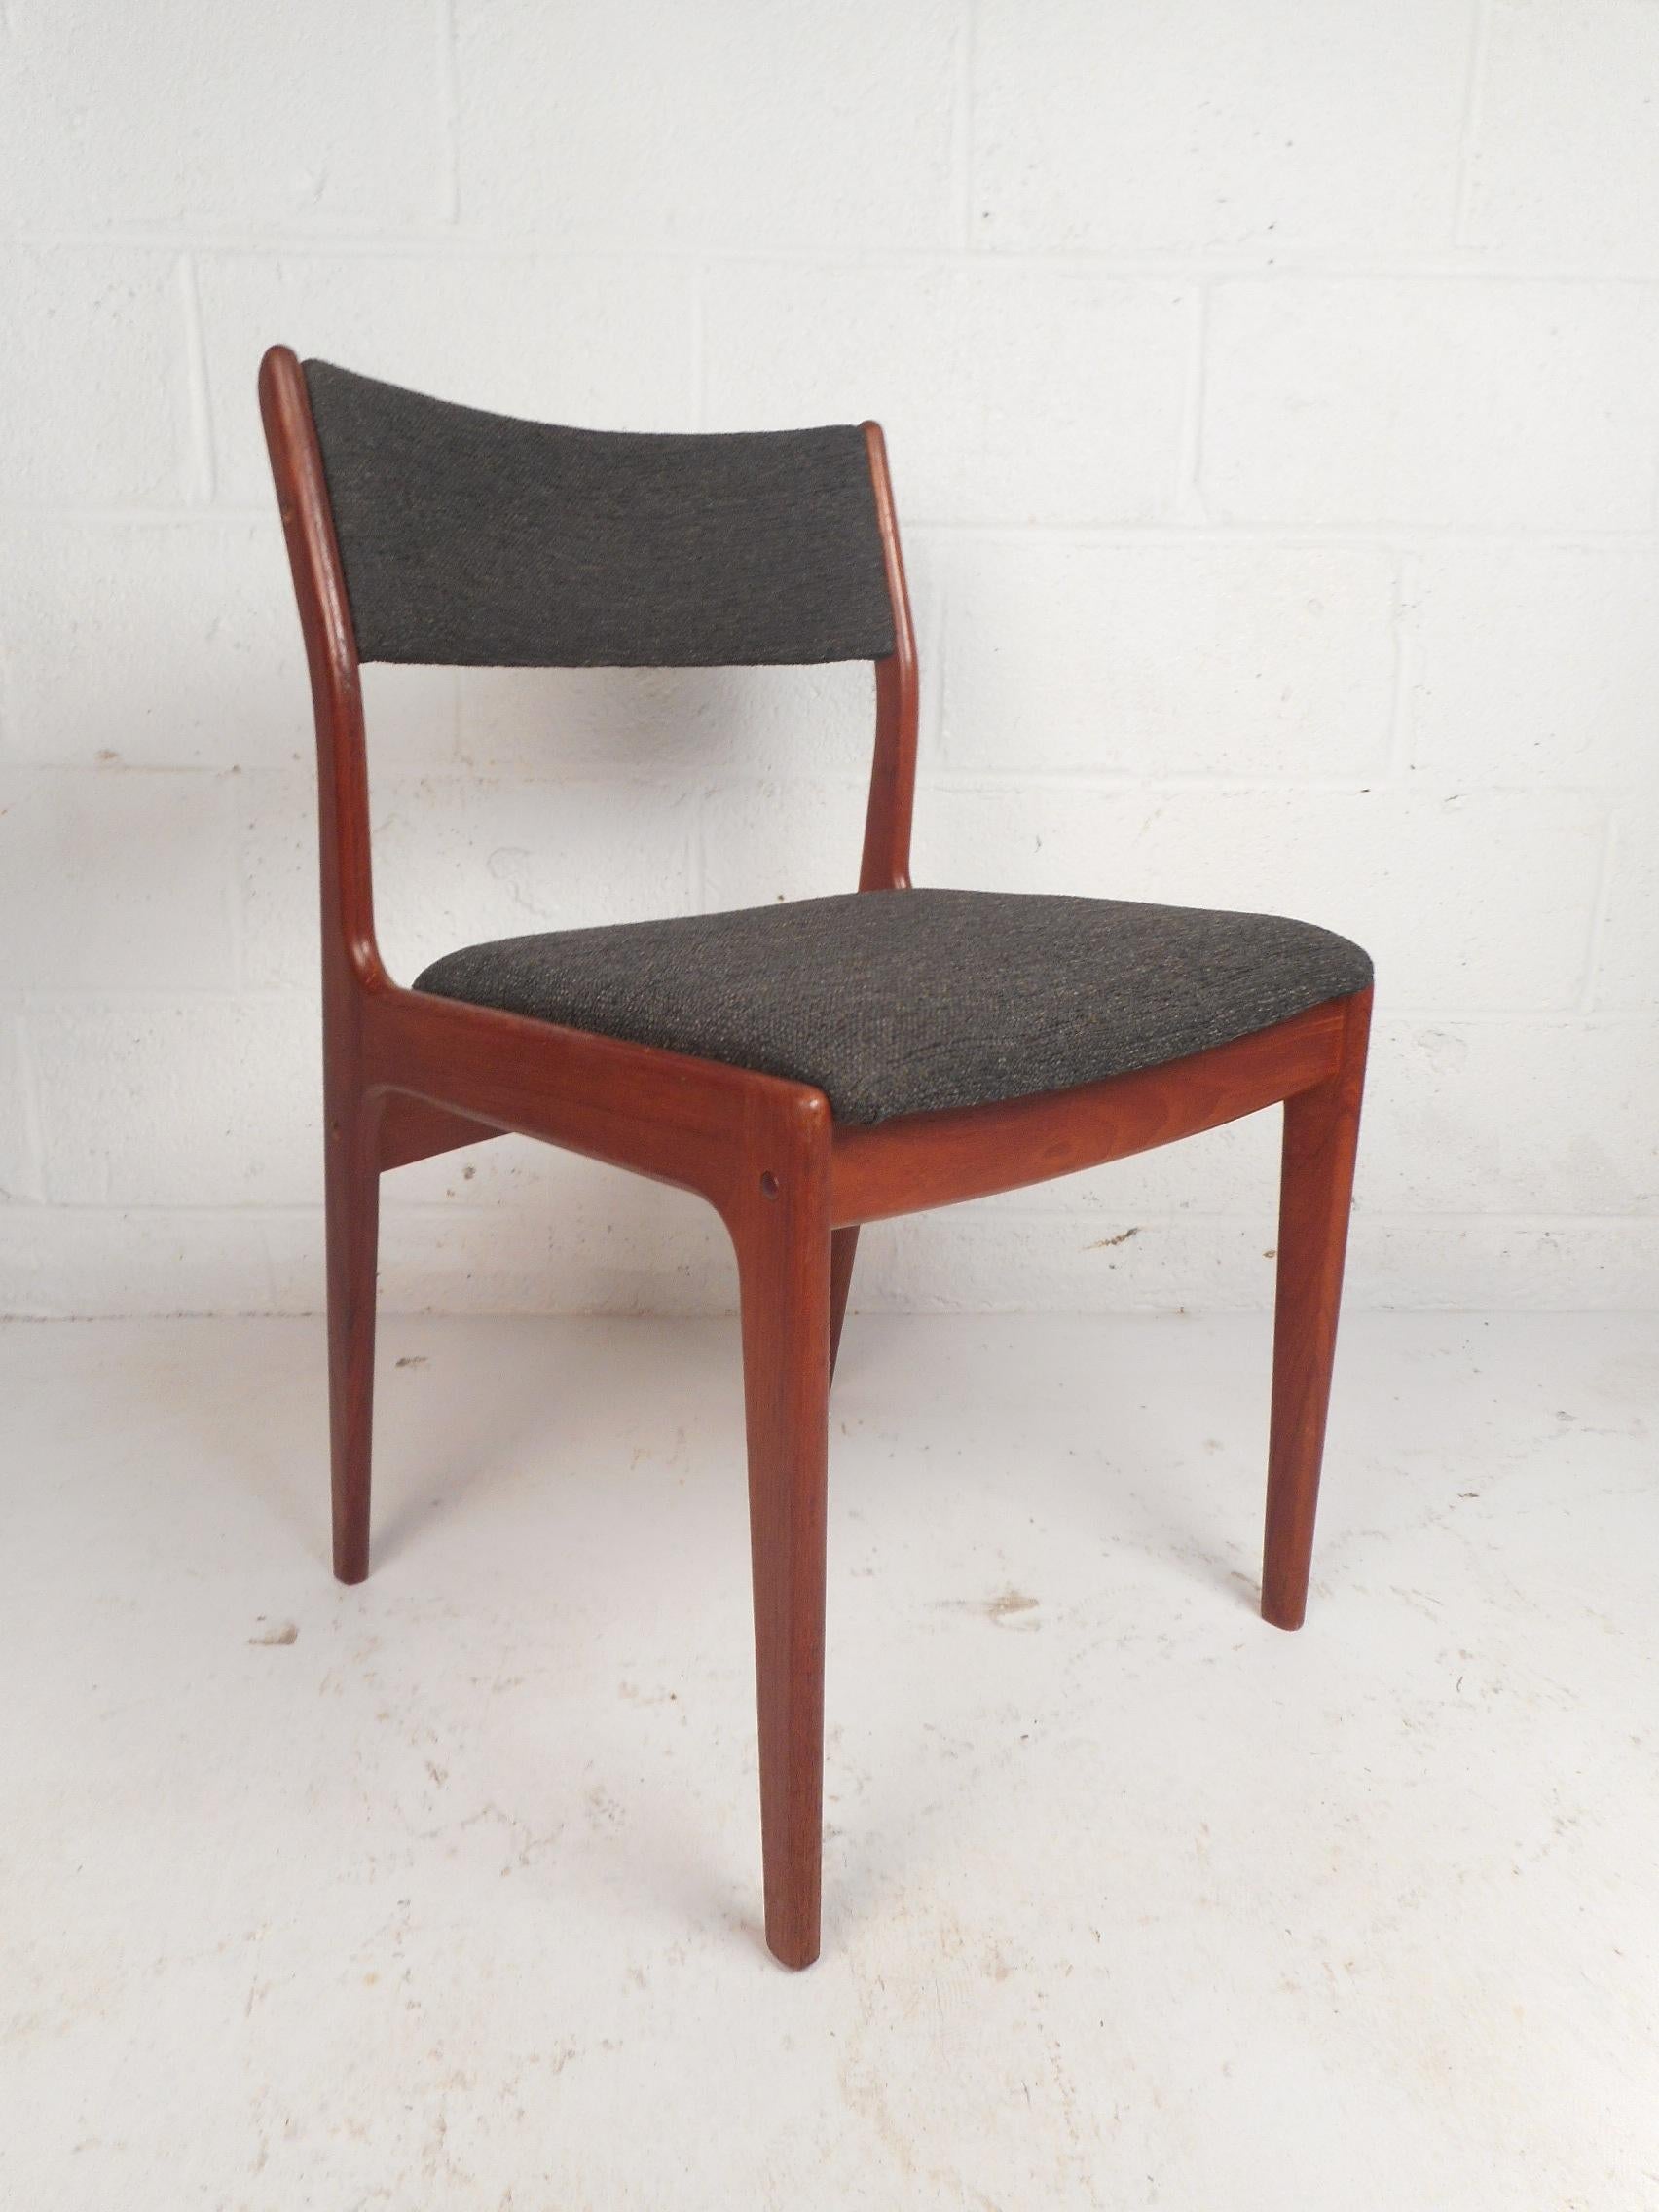 This gorgeous set of four dining chairs feature sculpted teak frames and tapered legs. Sleek design with a curved back rest ensuring maximum comfort without sacrificing style. A thick padded seat and back rest covered in a beautiful dark colored